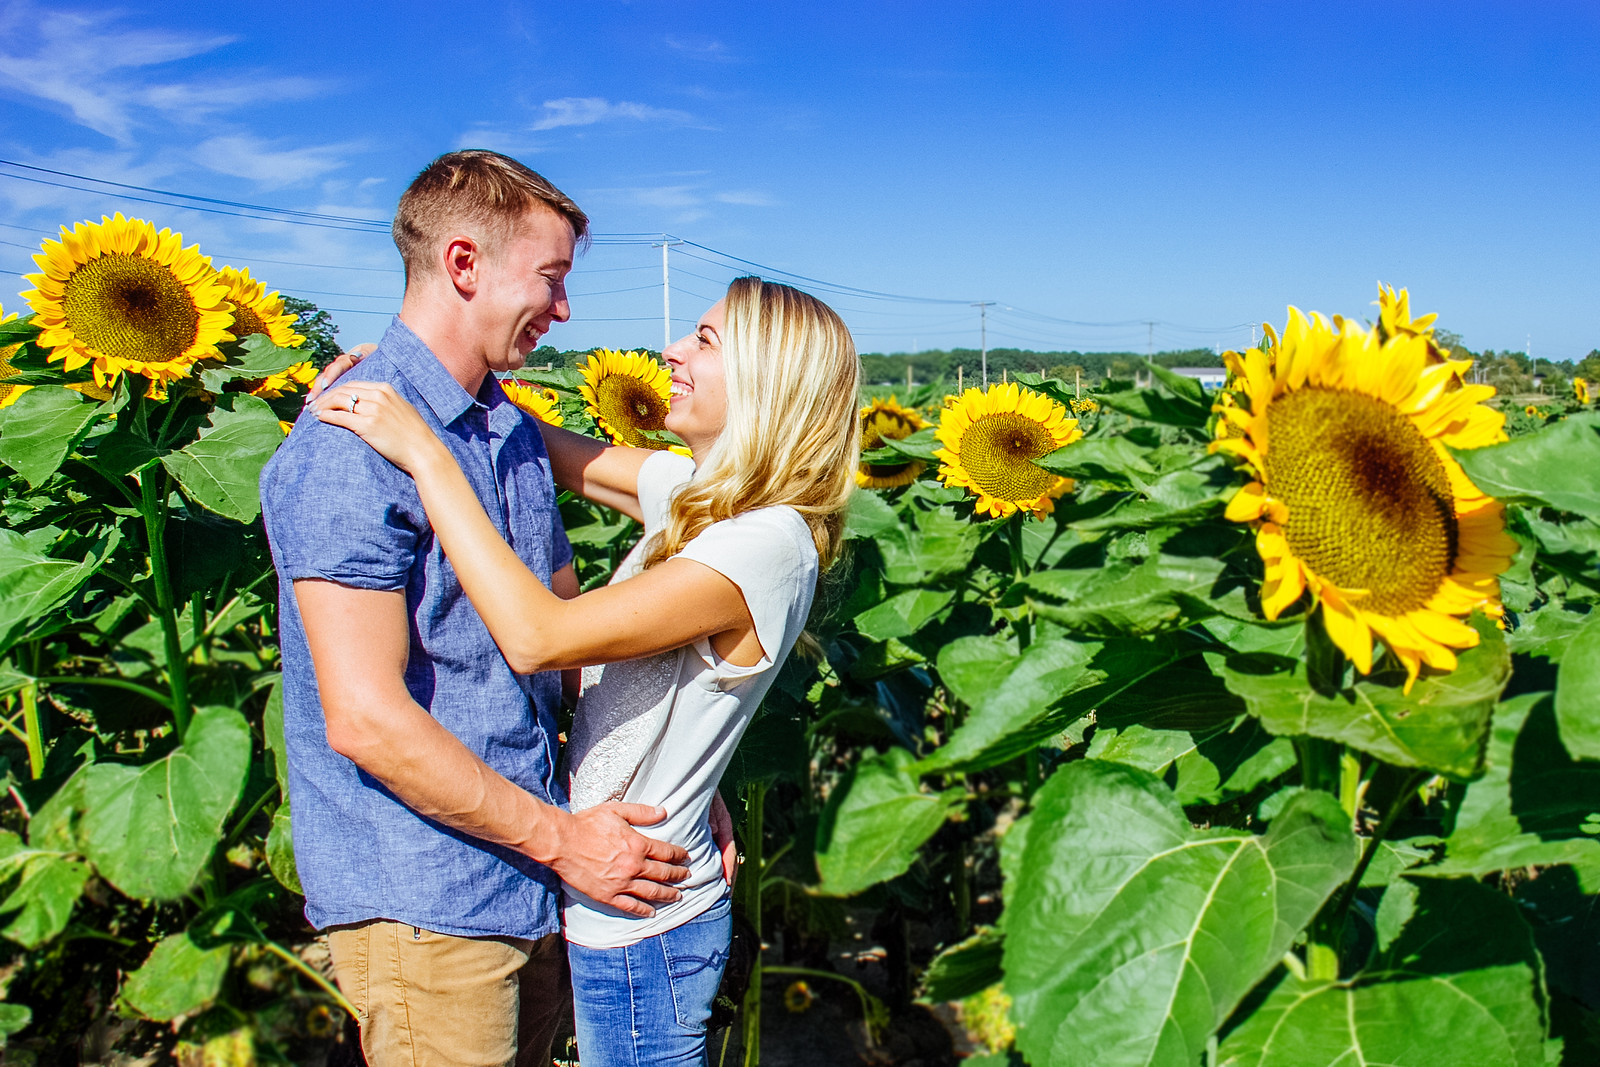 couples session, couples photoshoot, outdoor photography, natural light, save the date session, emotional photography, special moments, special events, memories of a lifetime, sunflowers